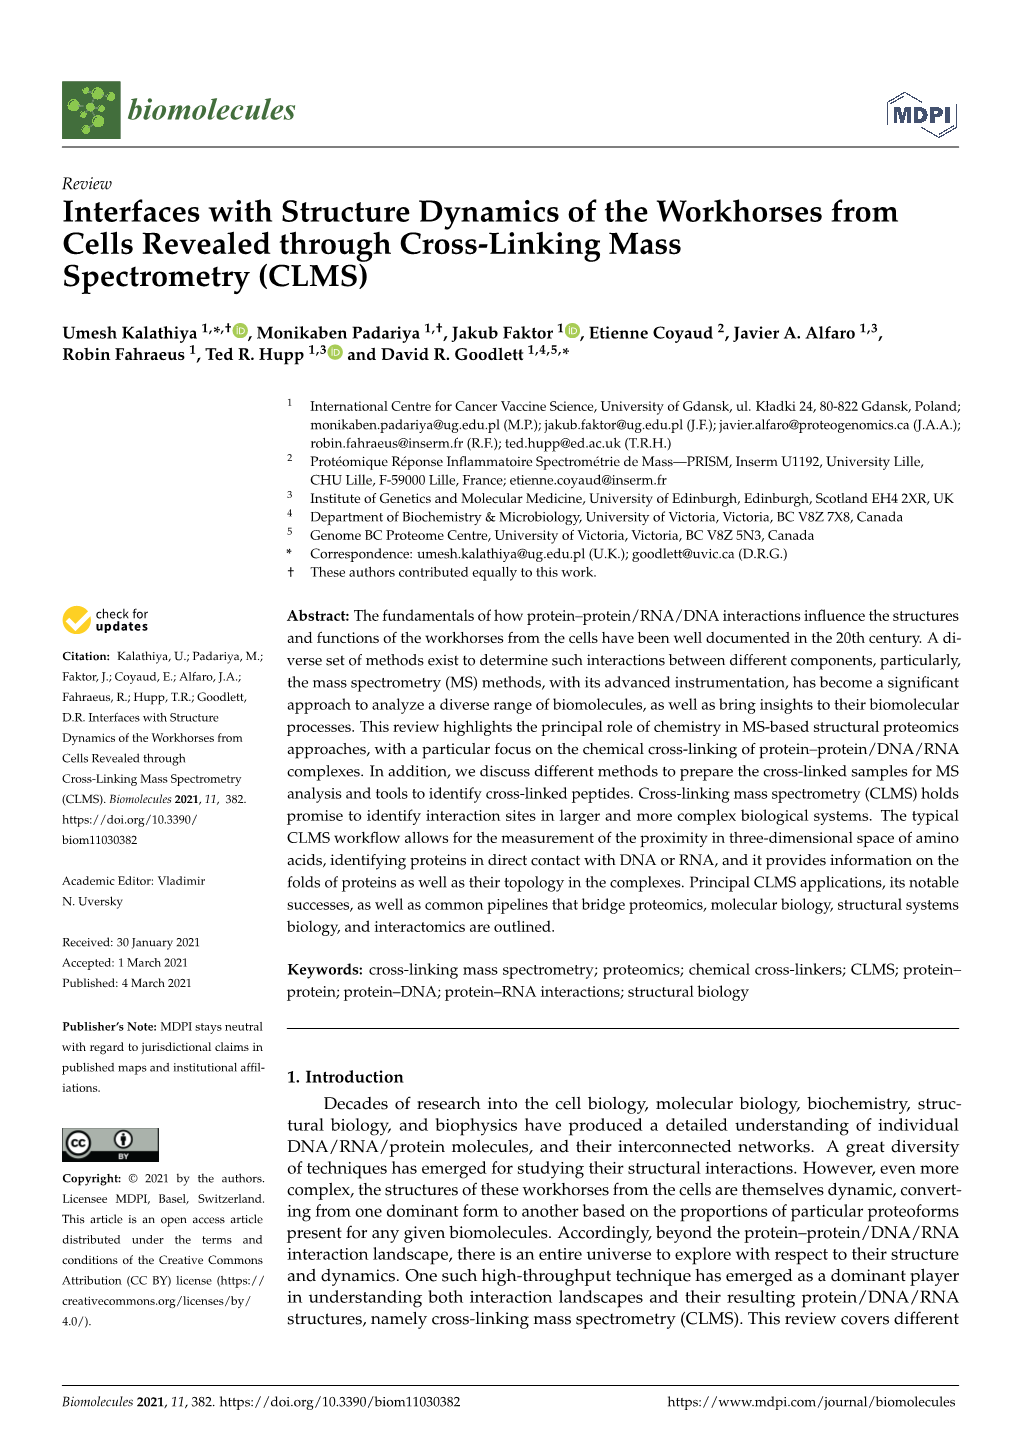 Interfaces with Structure Dynamics of the Workhorses from Cells Revealed Through Cross-Linking Mass Spectrometry (CLMS)